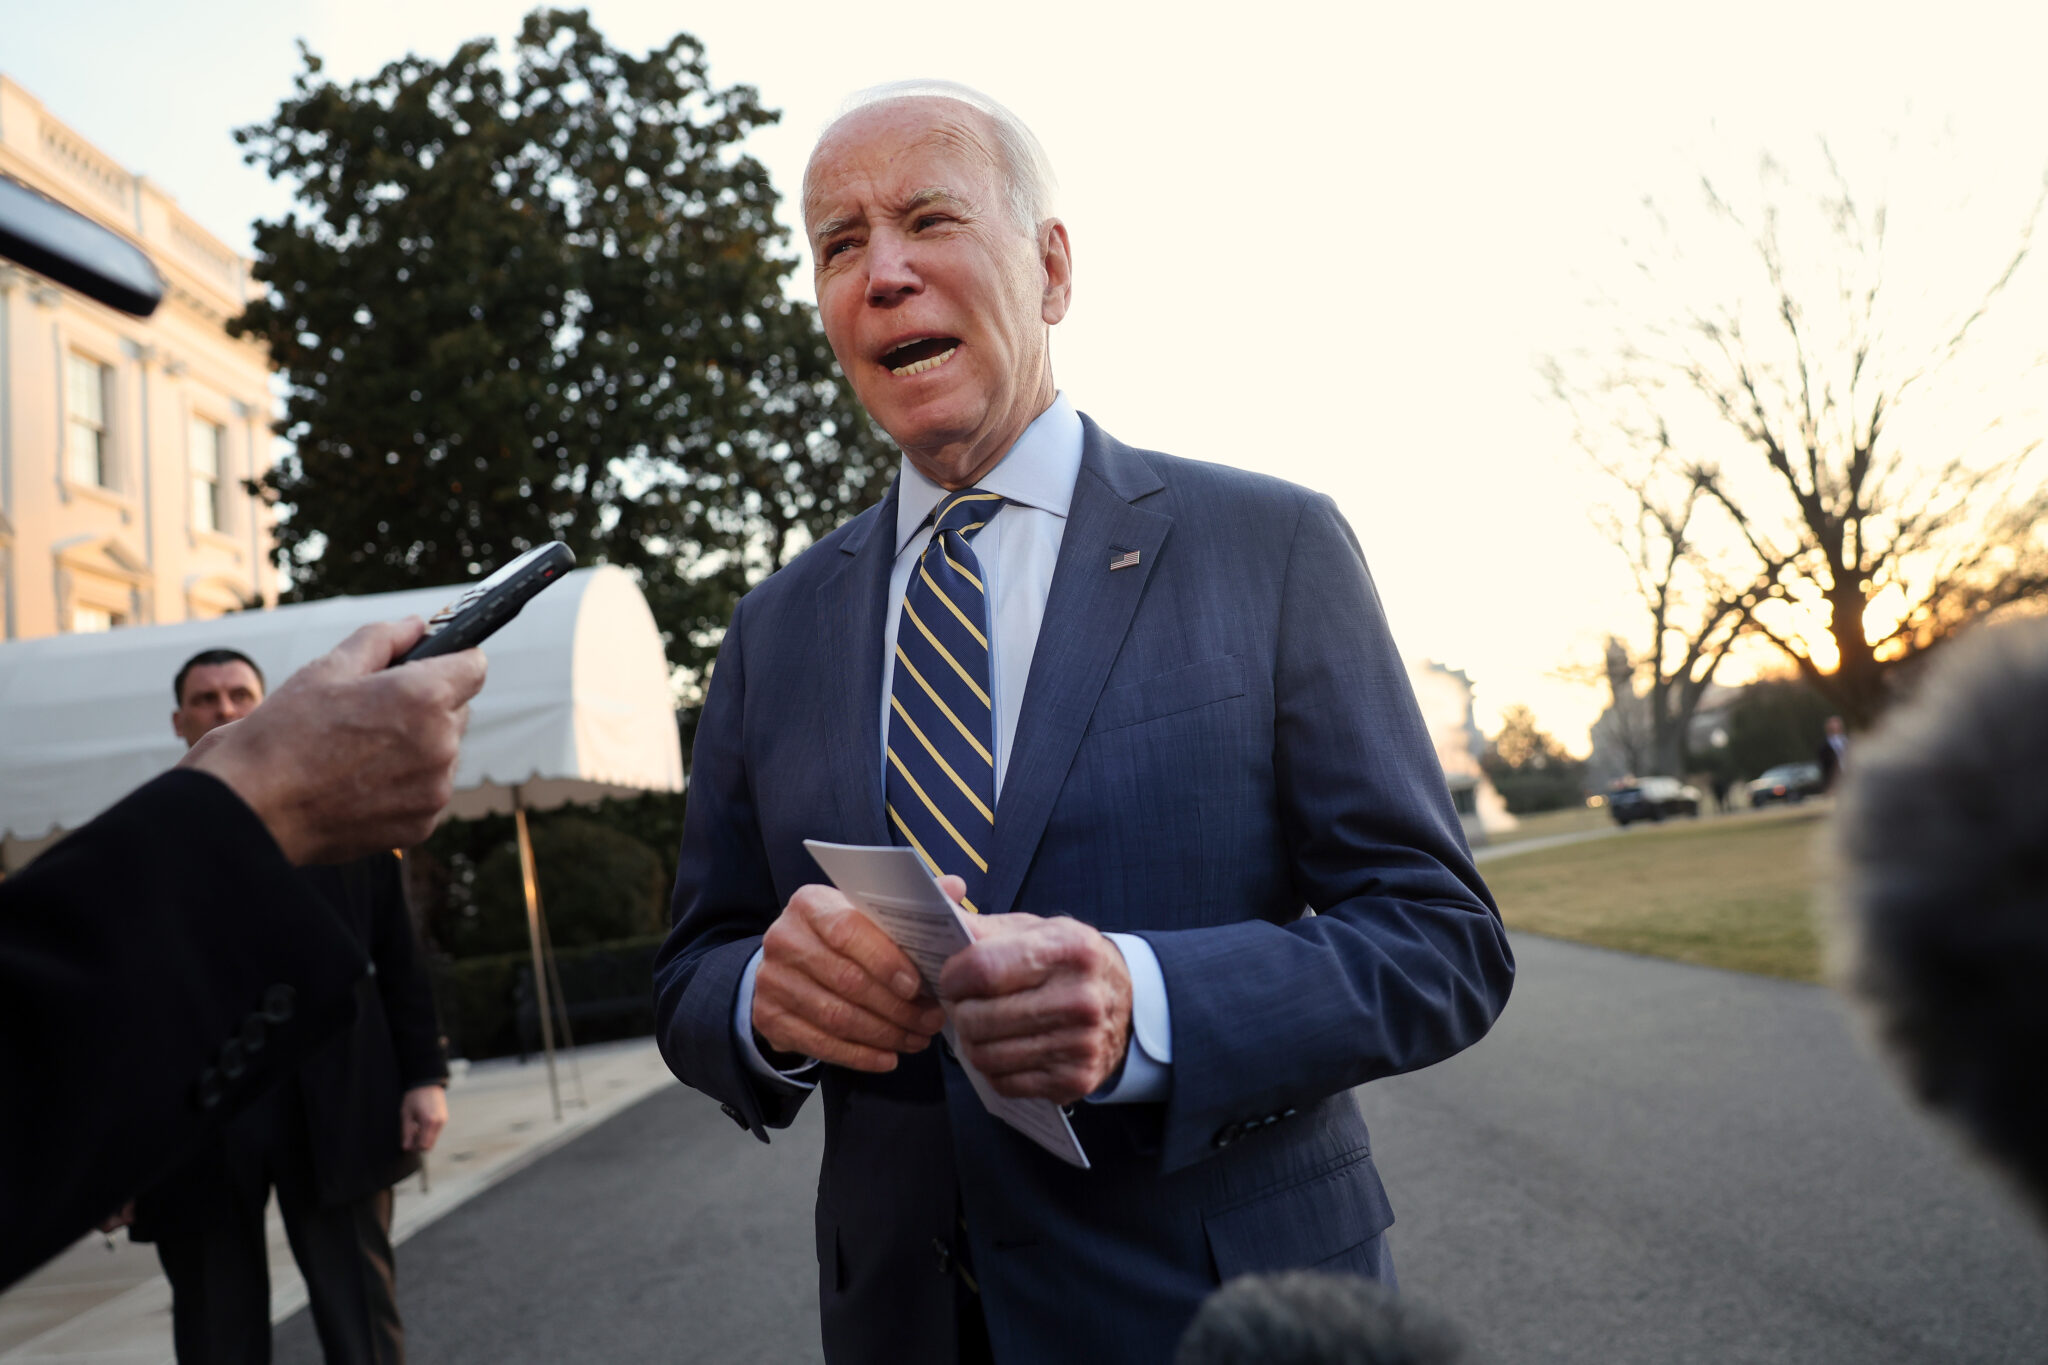 WASHINGTON, DC - JANUARY 11: U.S. President Joe Biden speaks on the FAA computer outage as he departs the White House on January 11, 2023 in Washington, DC. President Biden is accompanying First Lady Jill Biden to Walter Reed National Military Medical Center where she will undergo skin cancer treatment. (Photo by Kevin Dietsch/Getty Images)